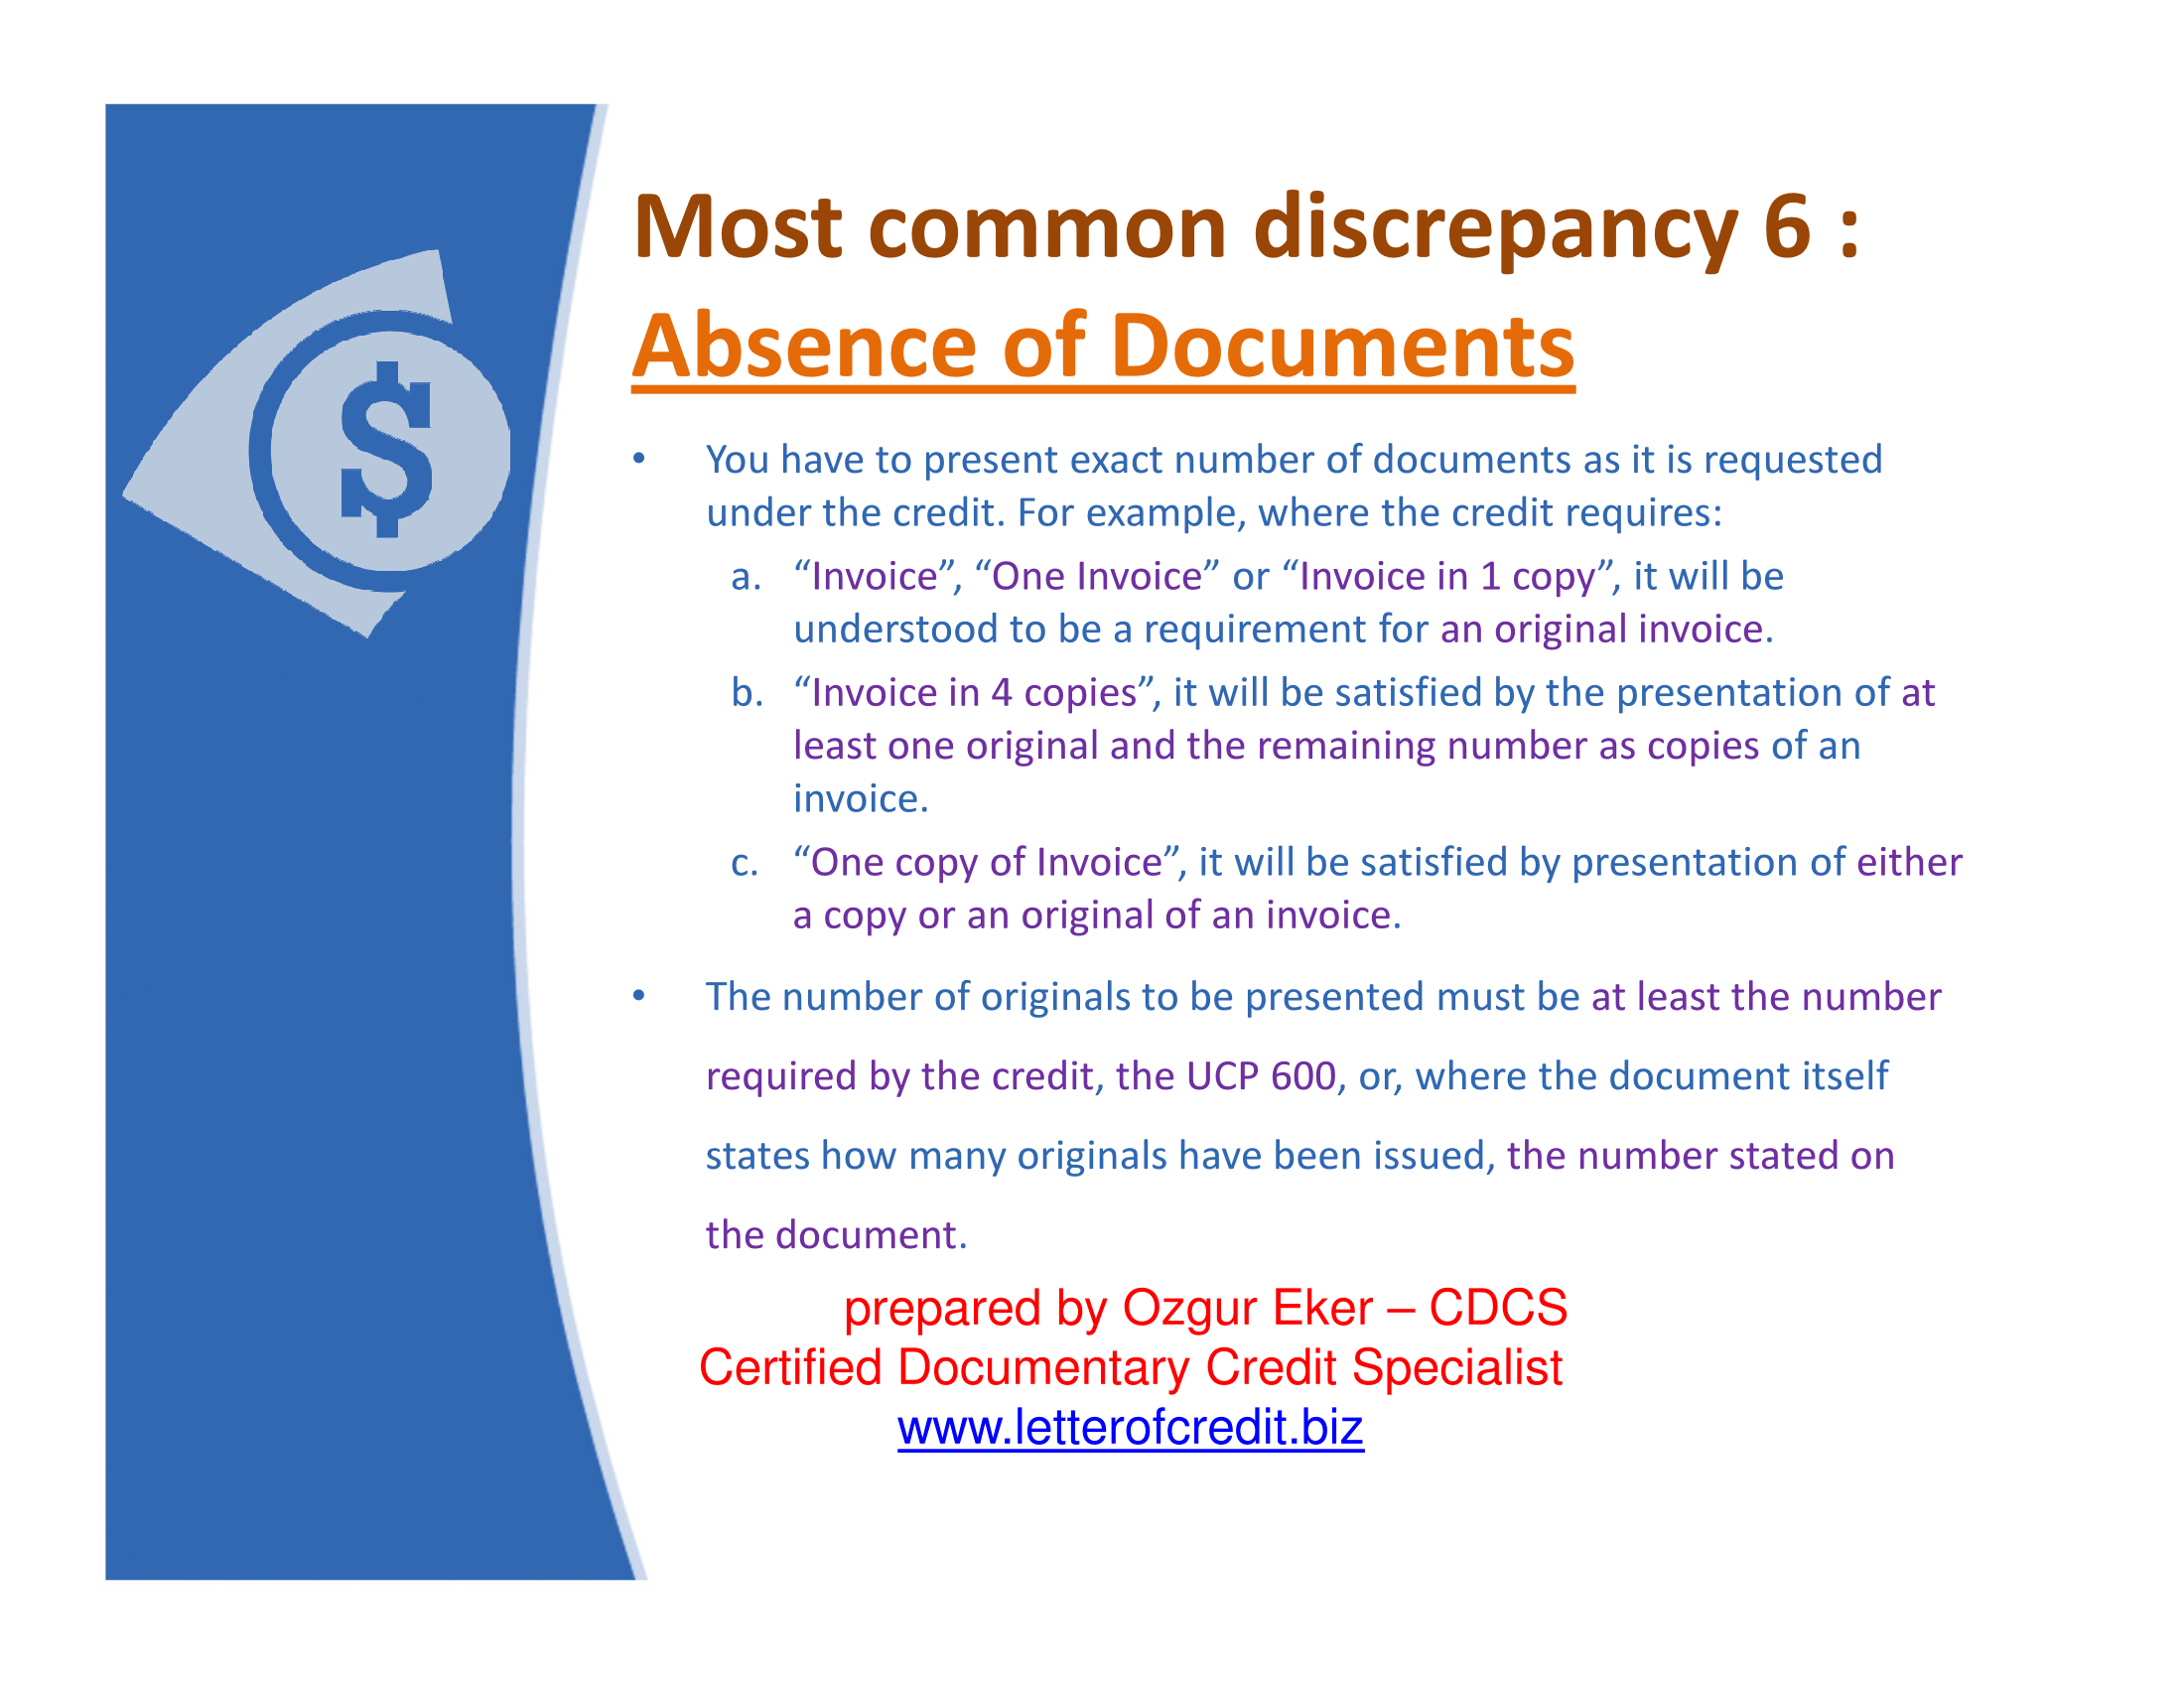 absence of documents